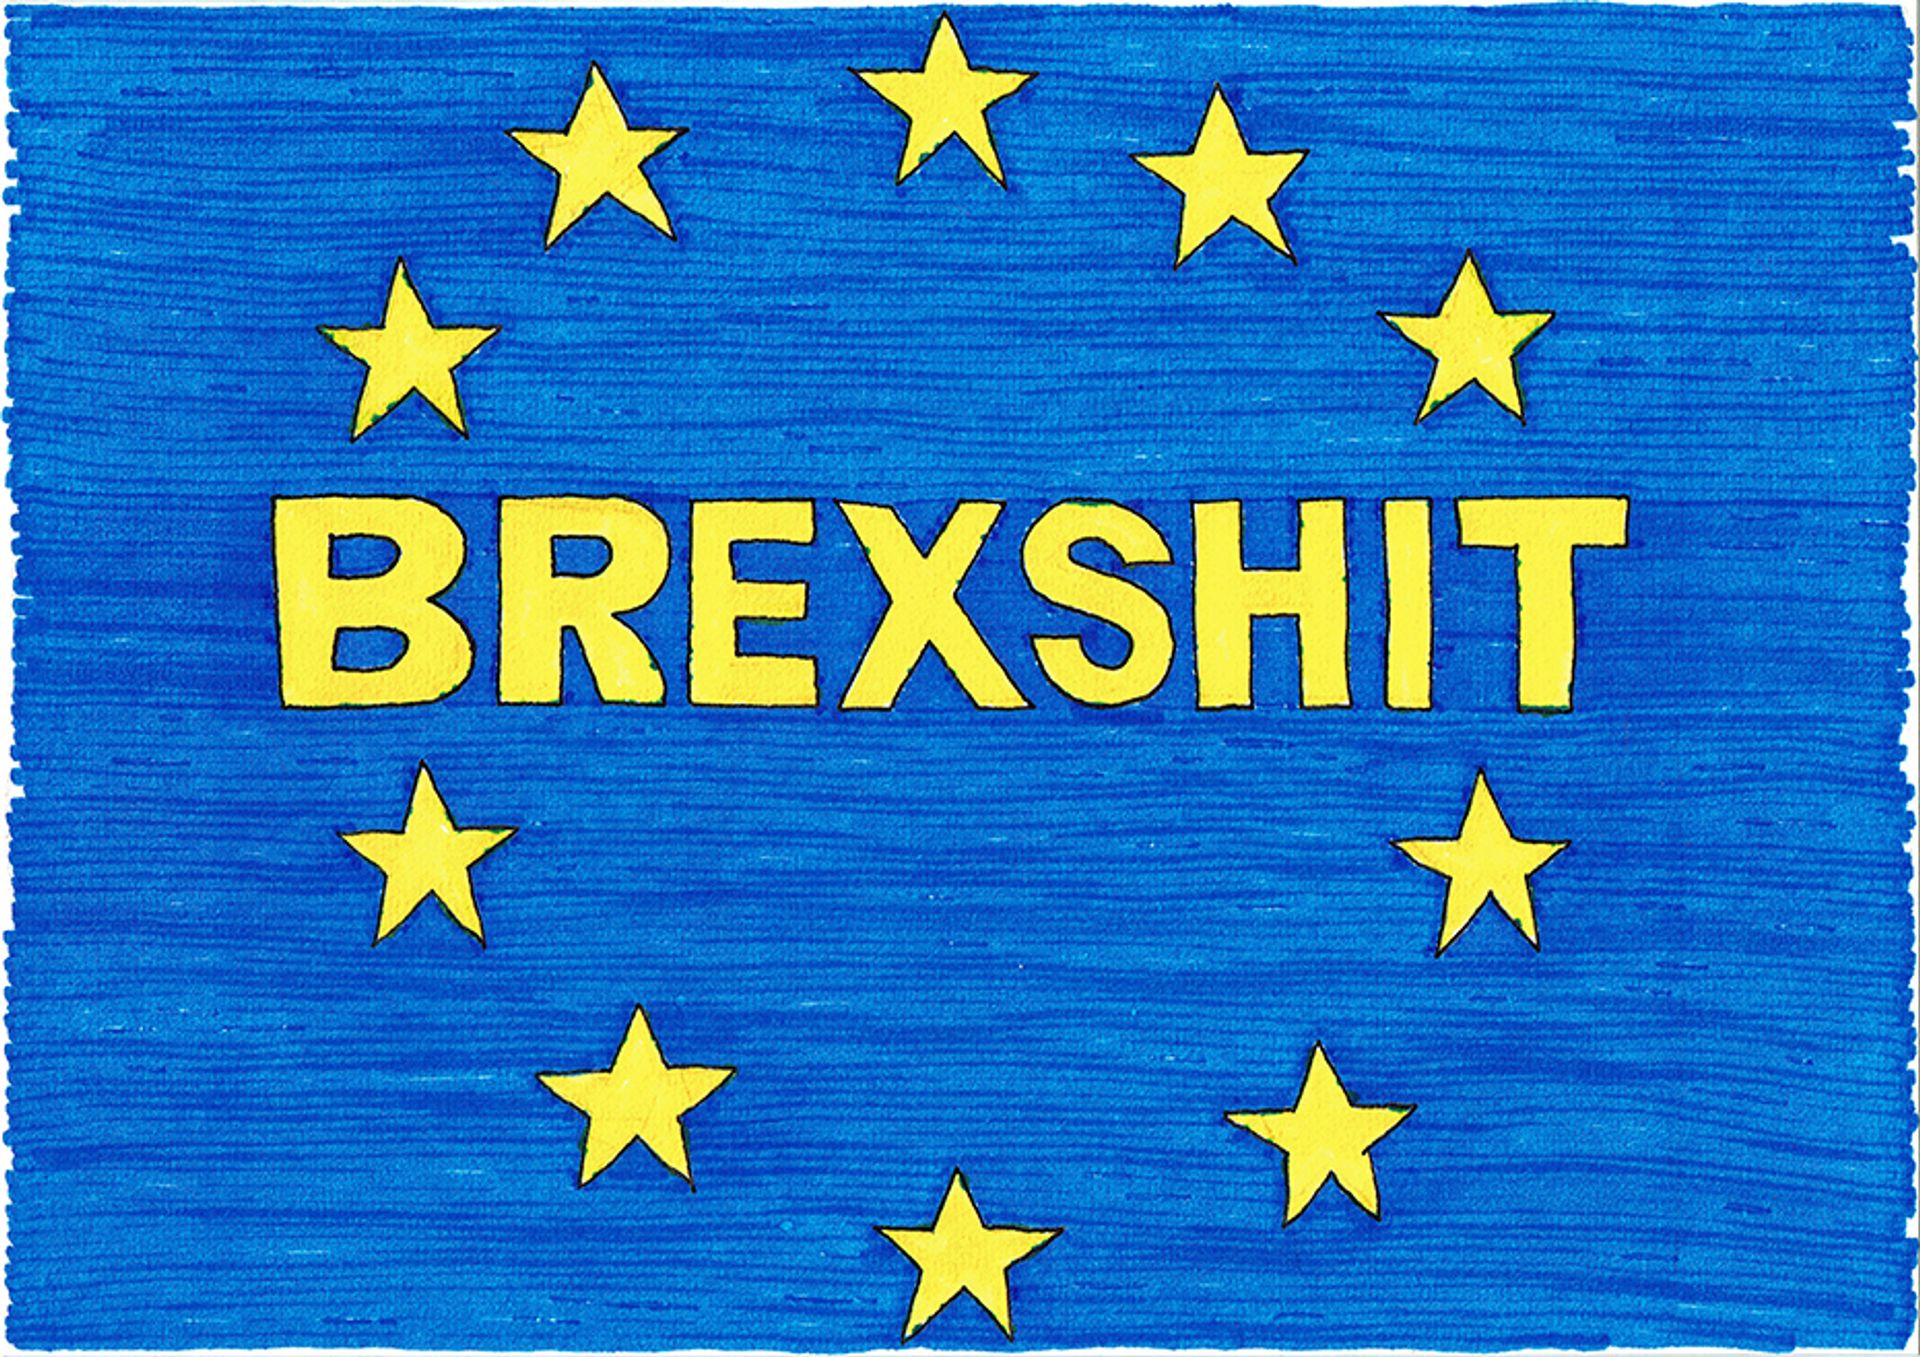 Michael Landy's Brexshit (2018) Courtesy of the Drawing Room